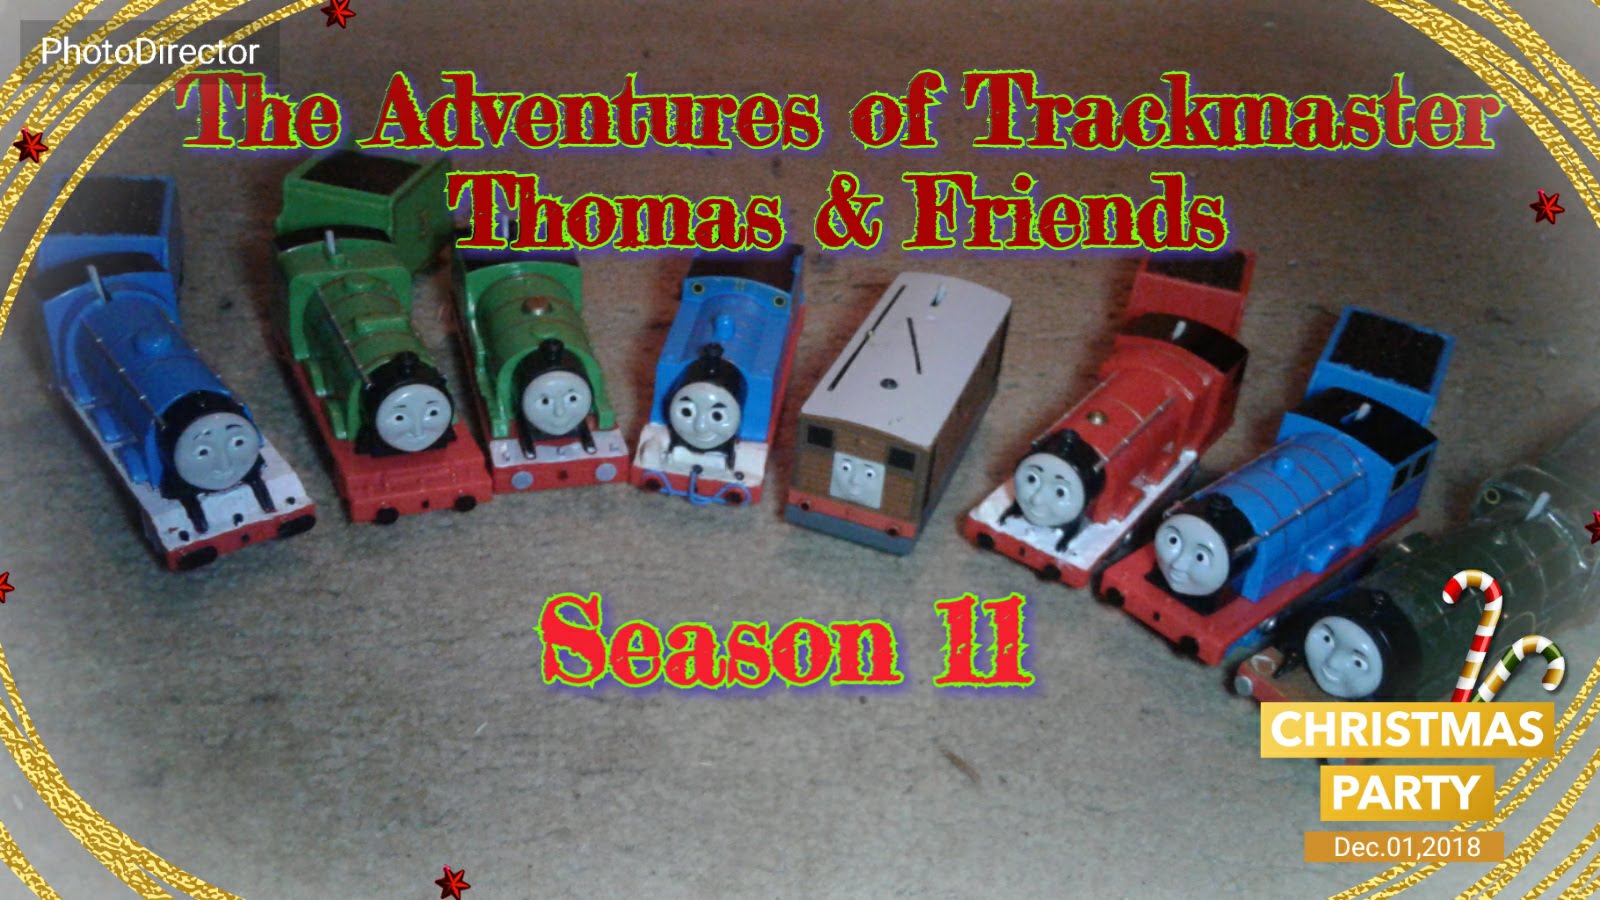 thomas and friends old trackmaster